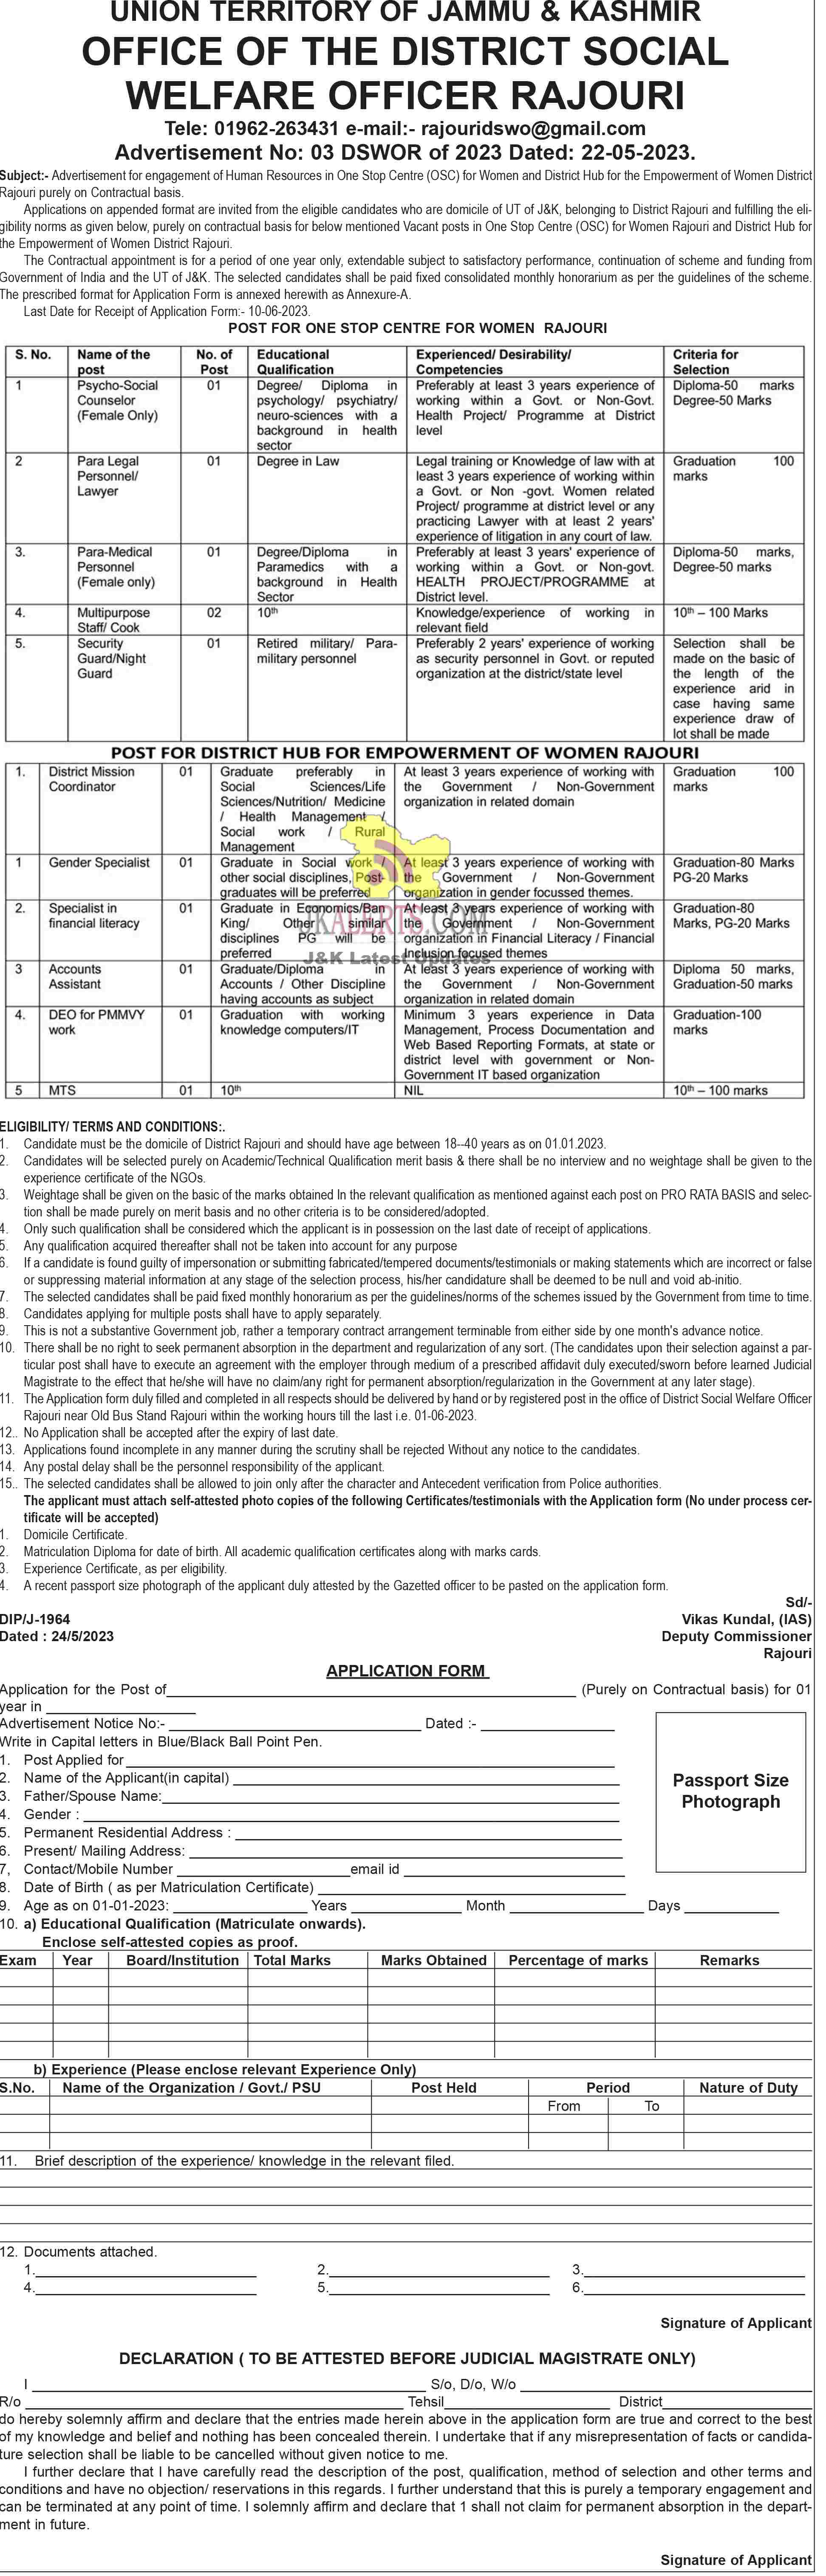 Jobs in One Stop Center for DHEW Rajouri.